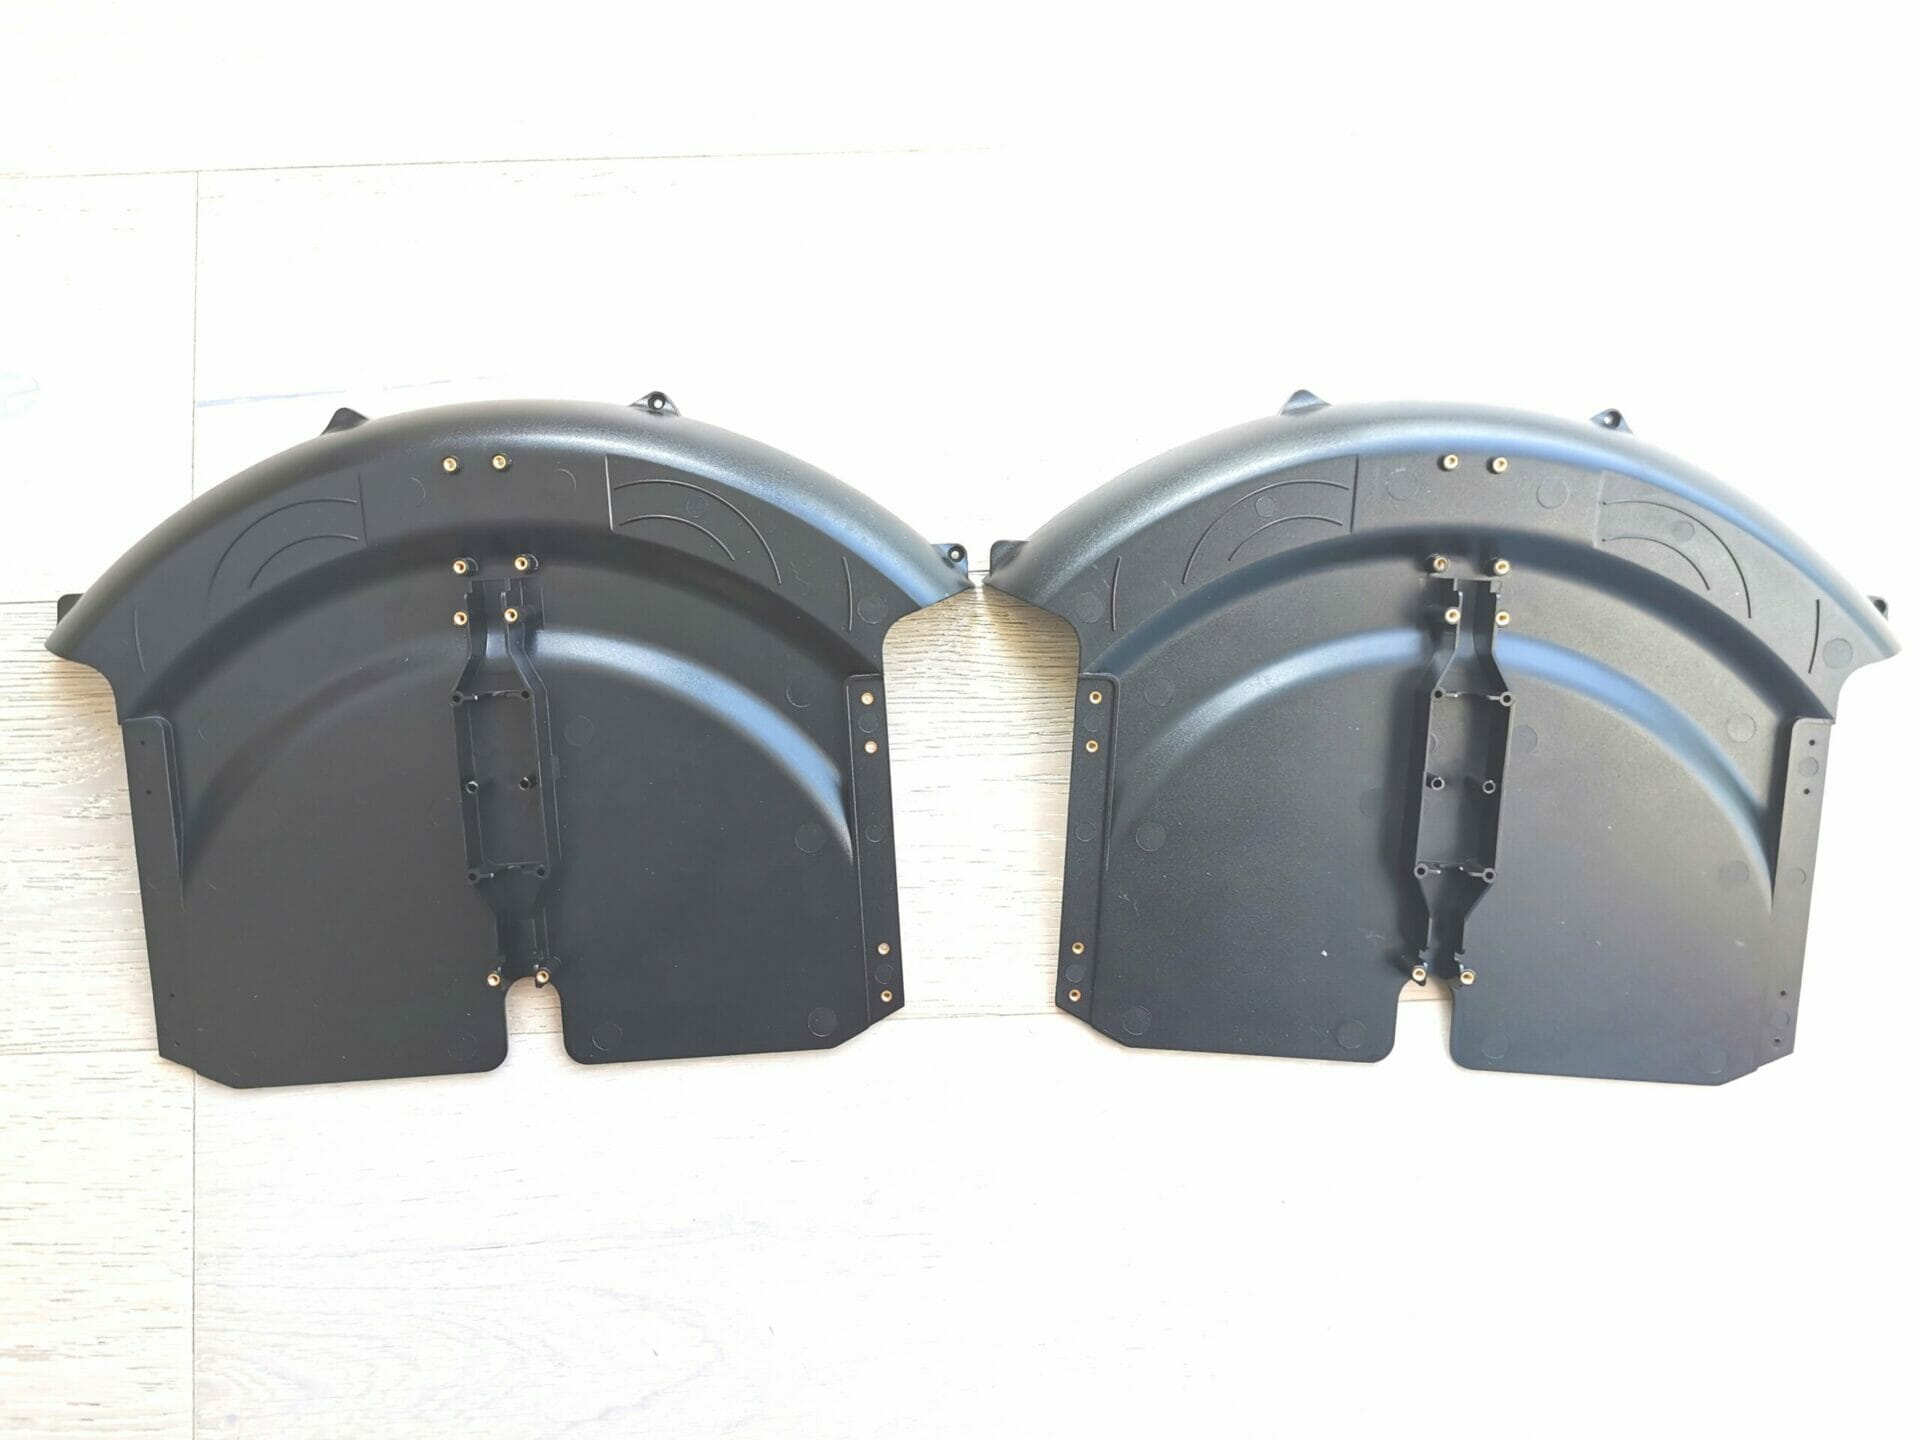 Kingsong S18 Electric Unicycle Interior Mud Protector Mudguard 1 Pair